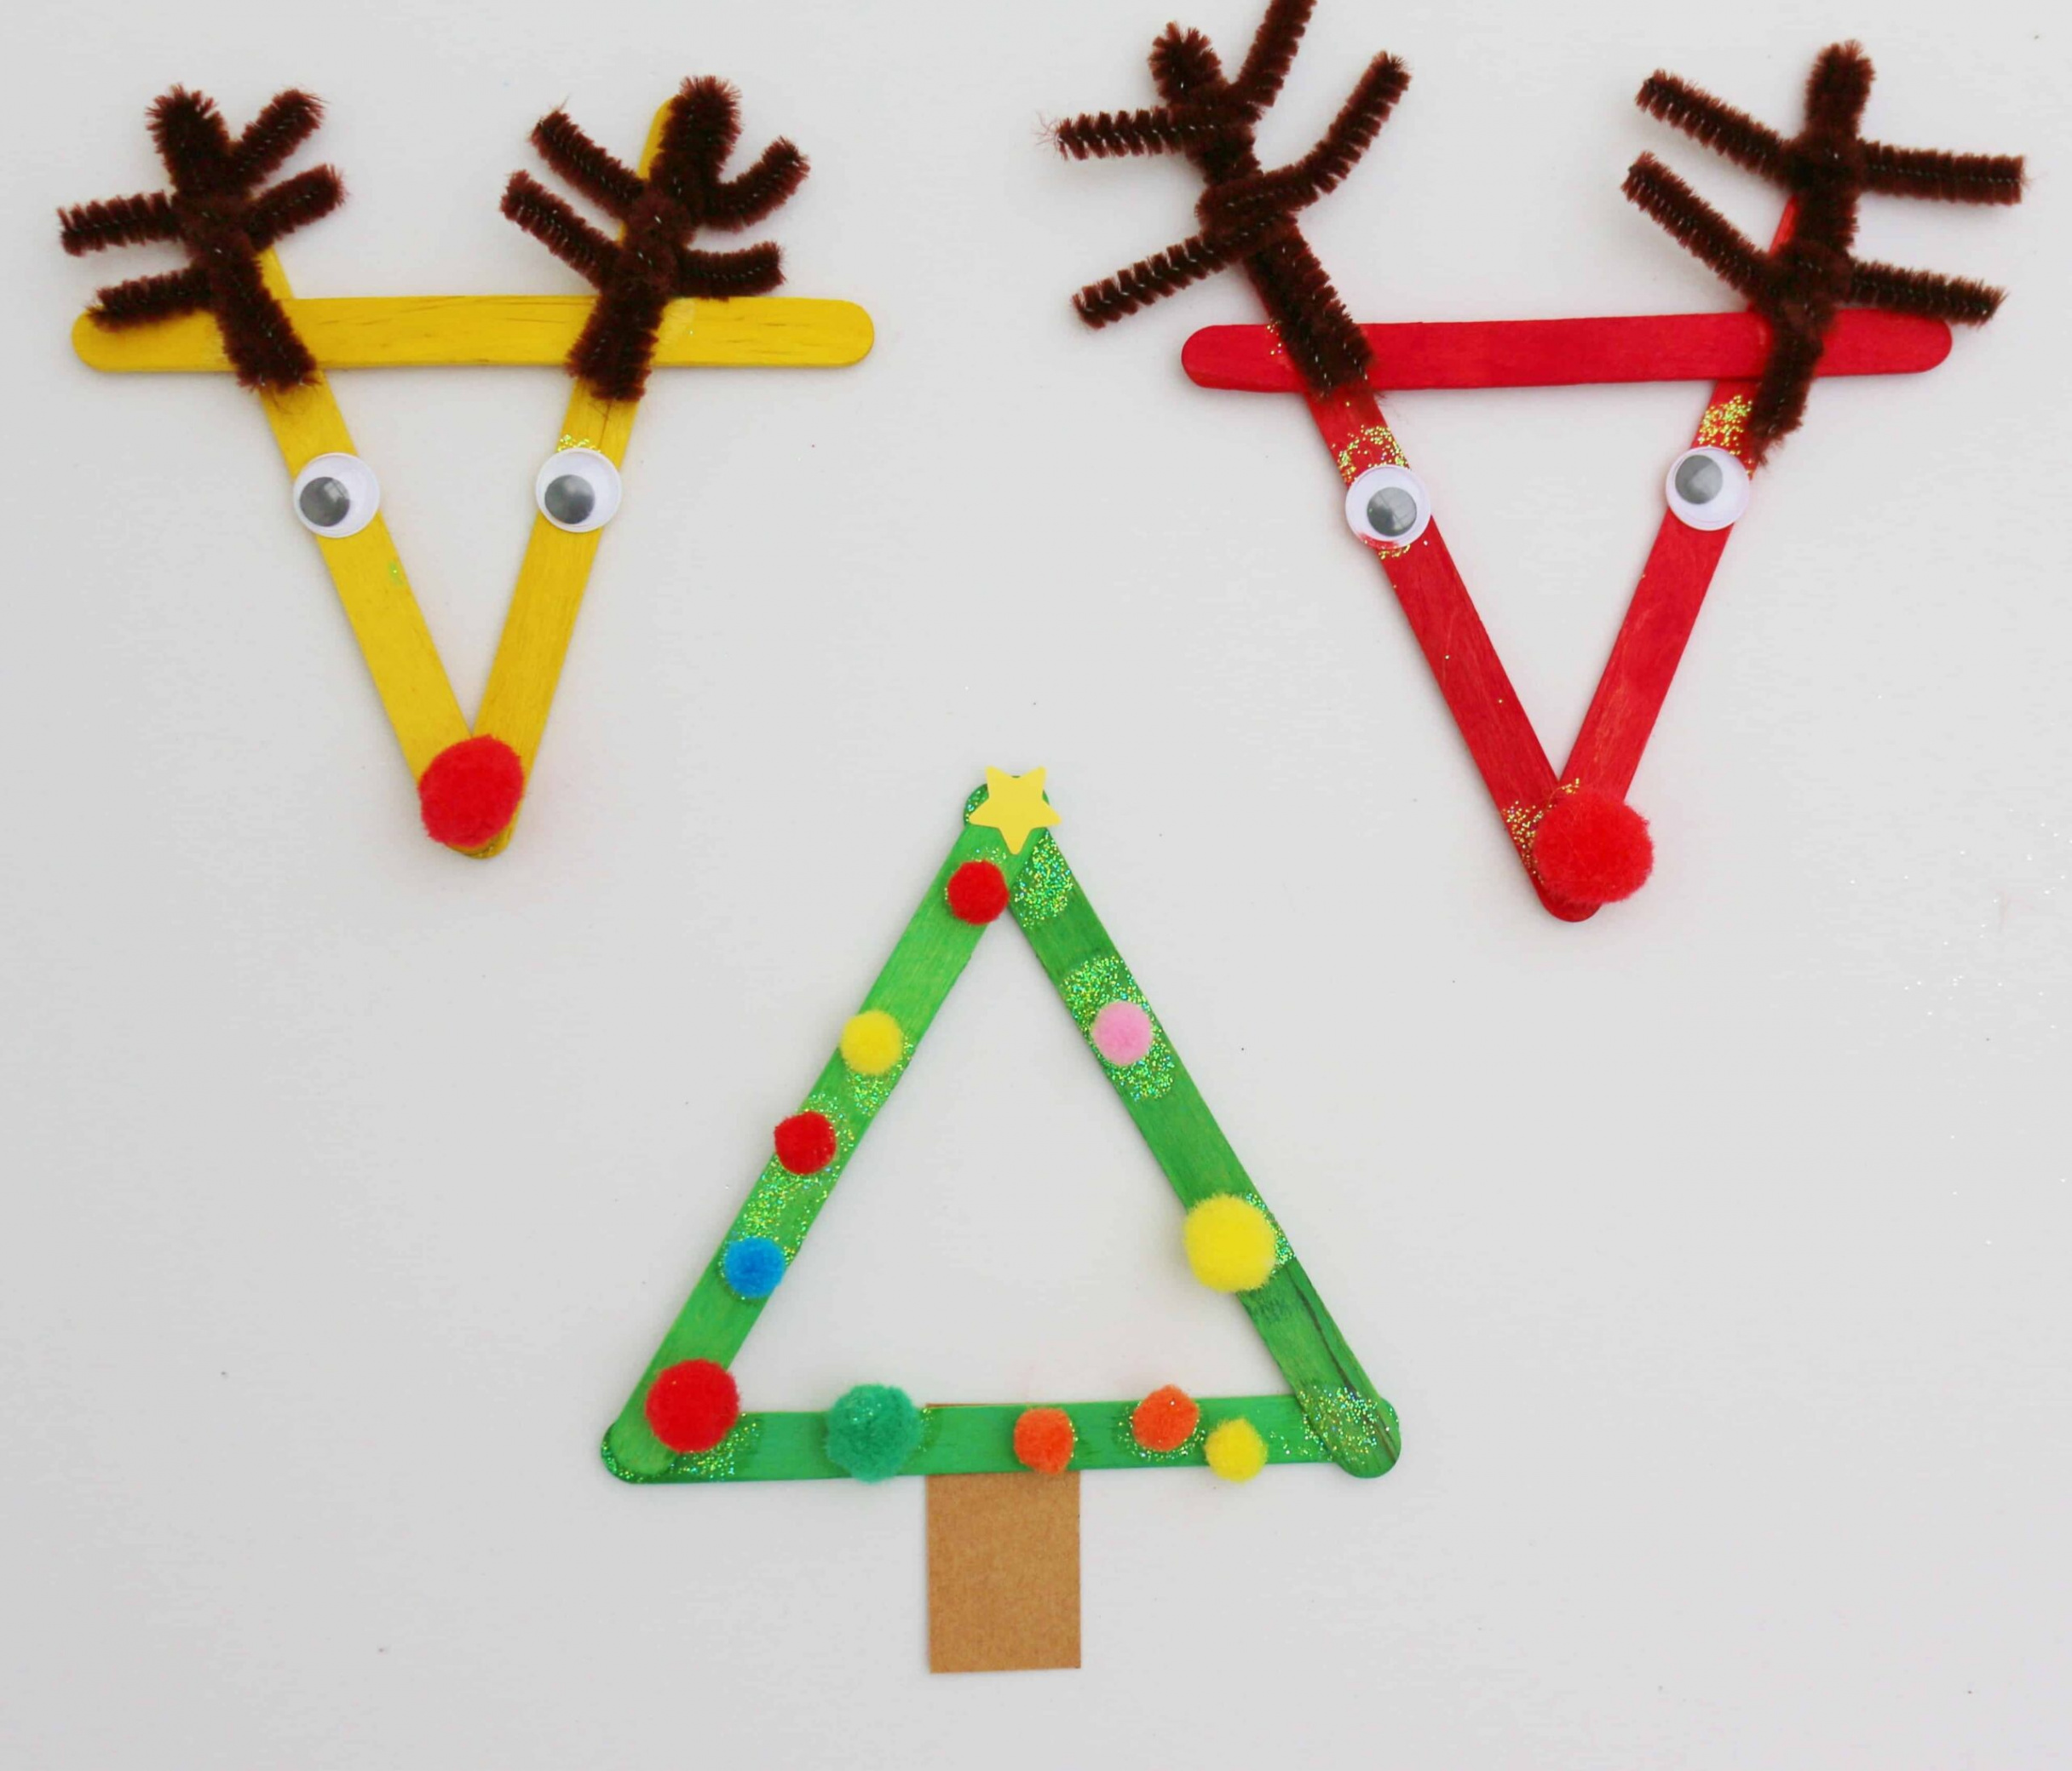 Lolly Stick Christmas Crafts - Simple Craft for kids to make